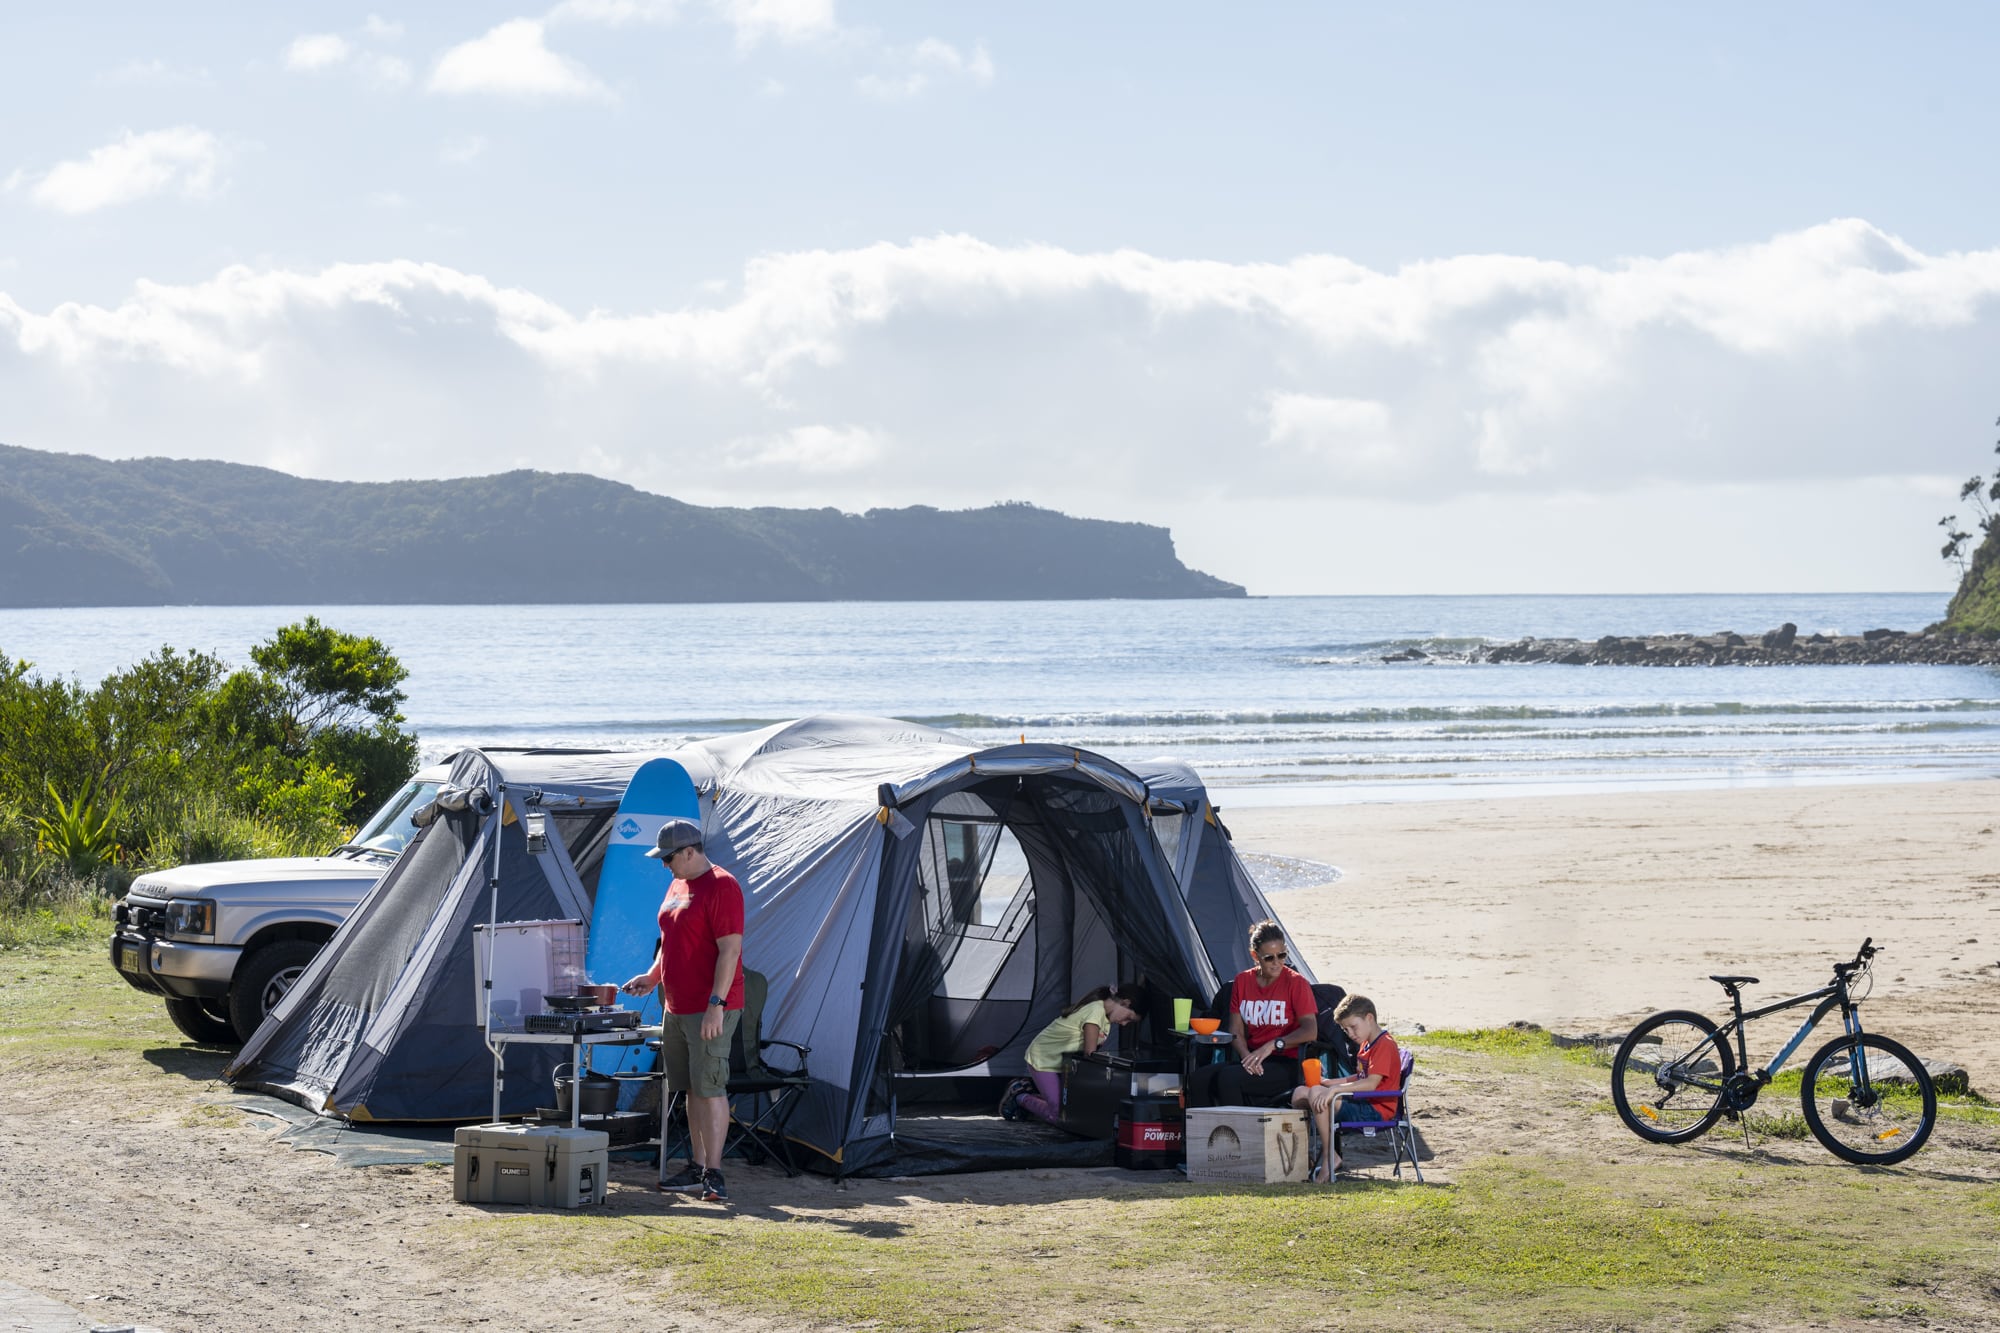 GEAR, Insulated Tumblers Go Head To Head - Which Is The Best?, Camping  Blog Camping with Style